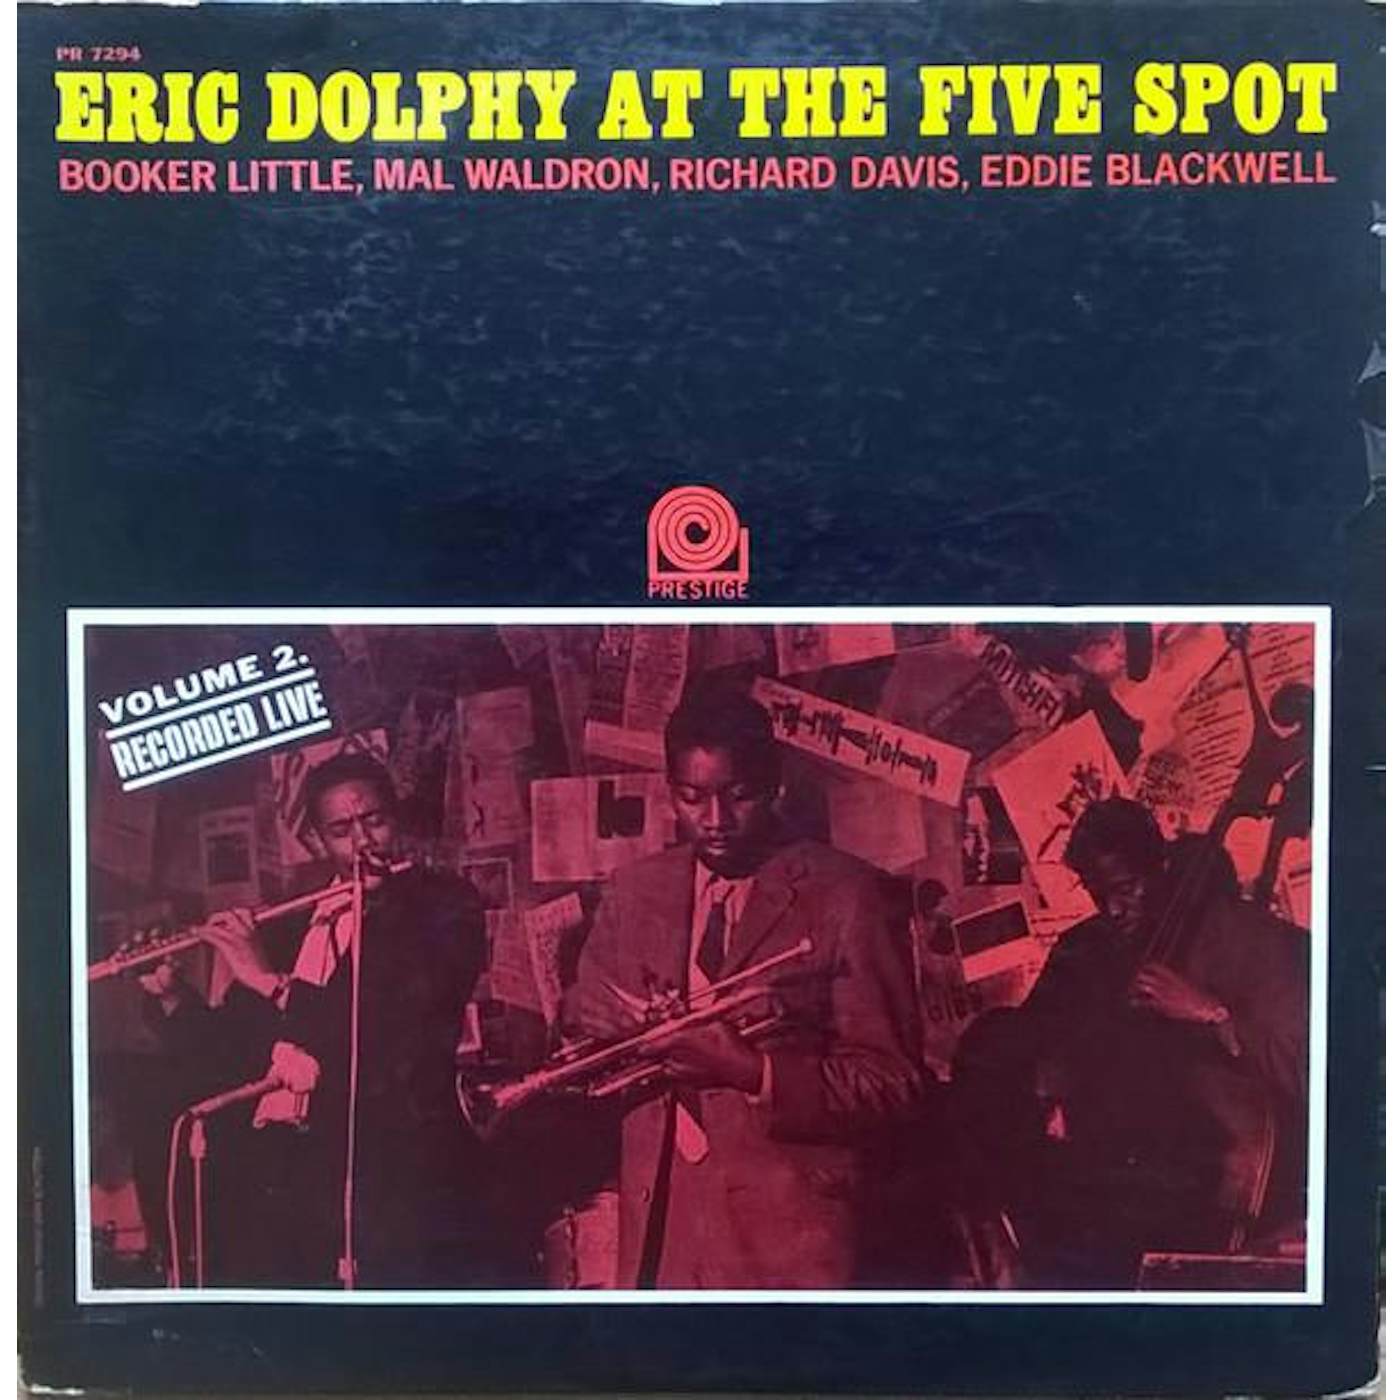 ERIC DOLPHY AT THE FIVE SPOT VOL 1 CD